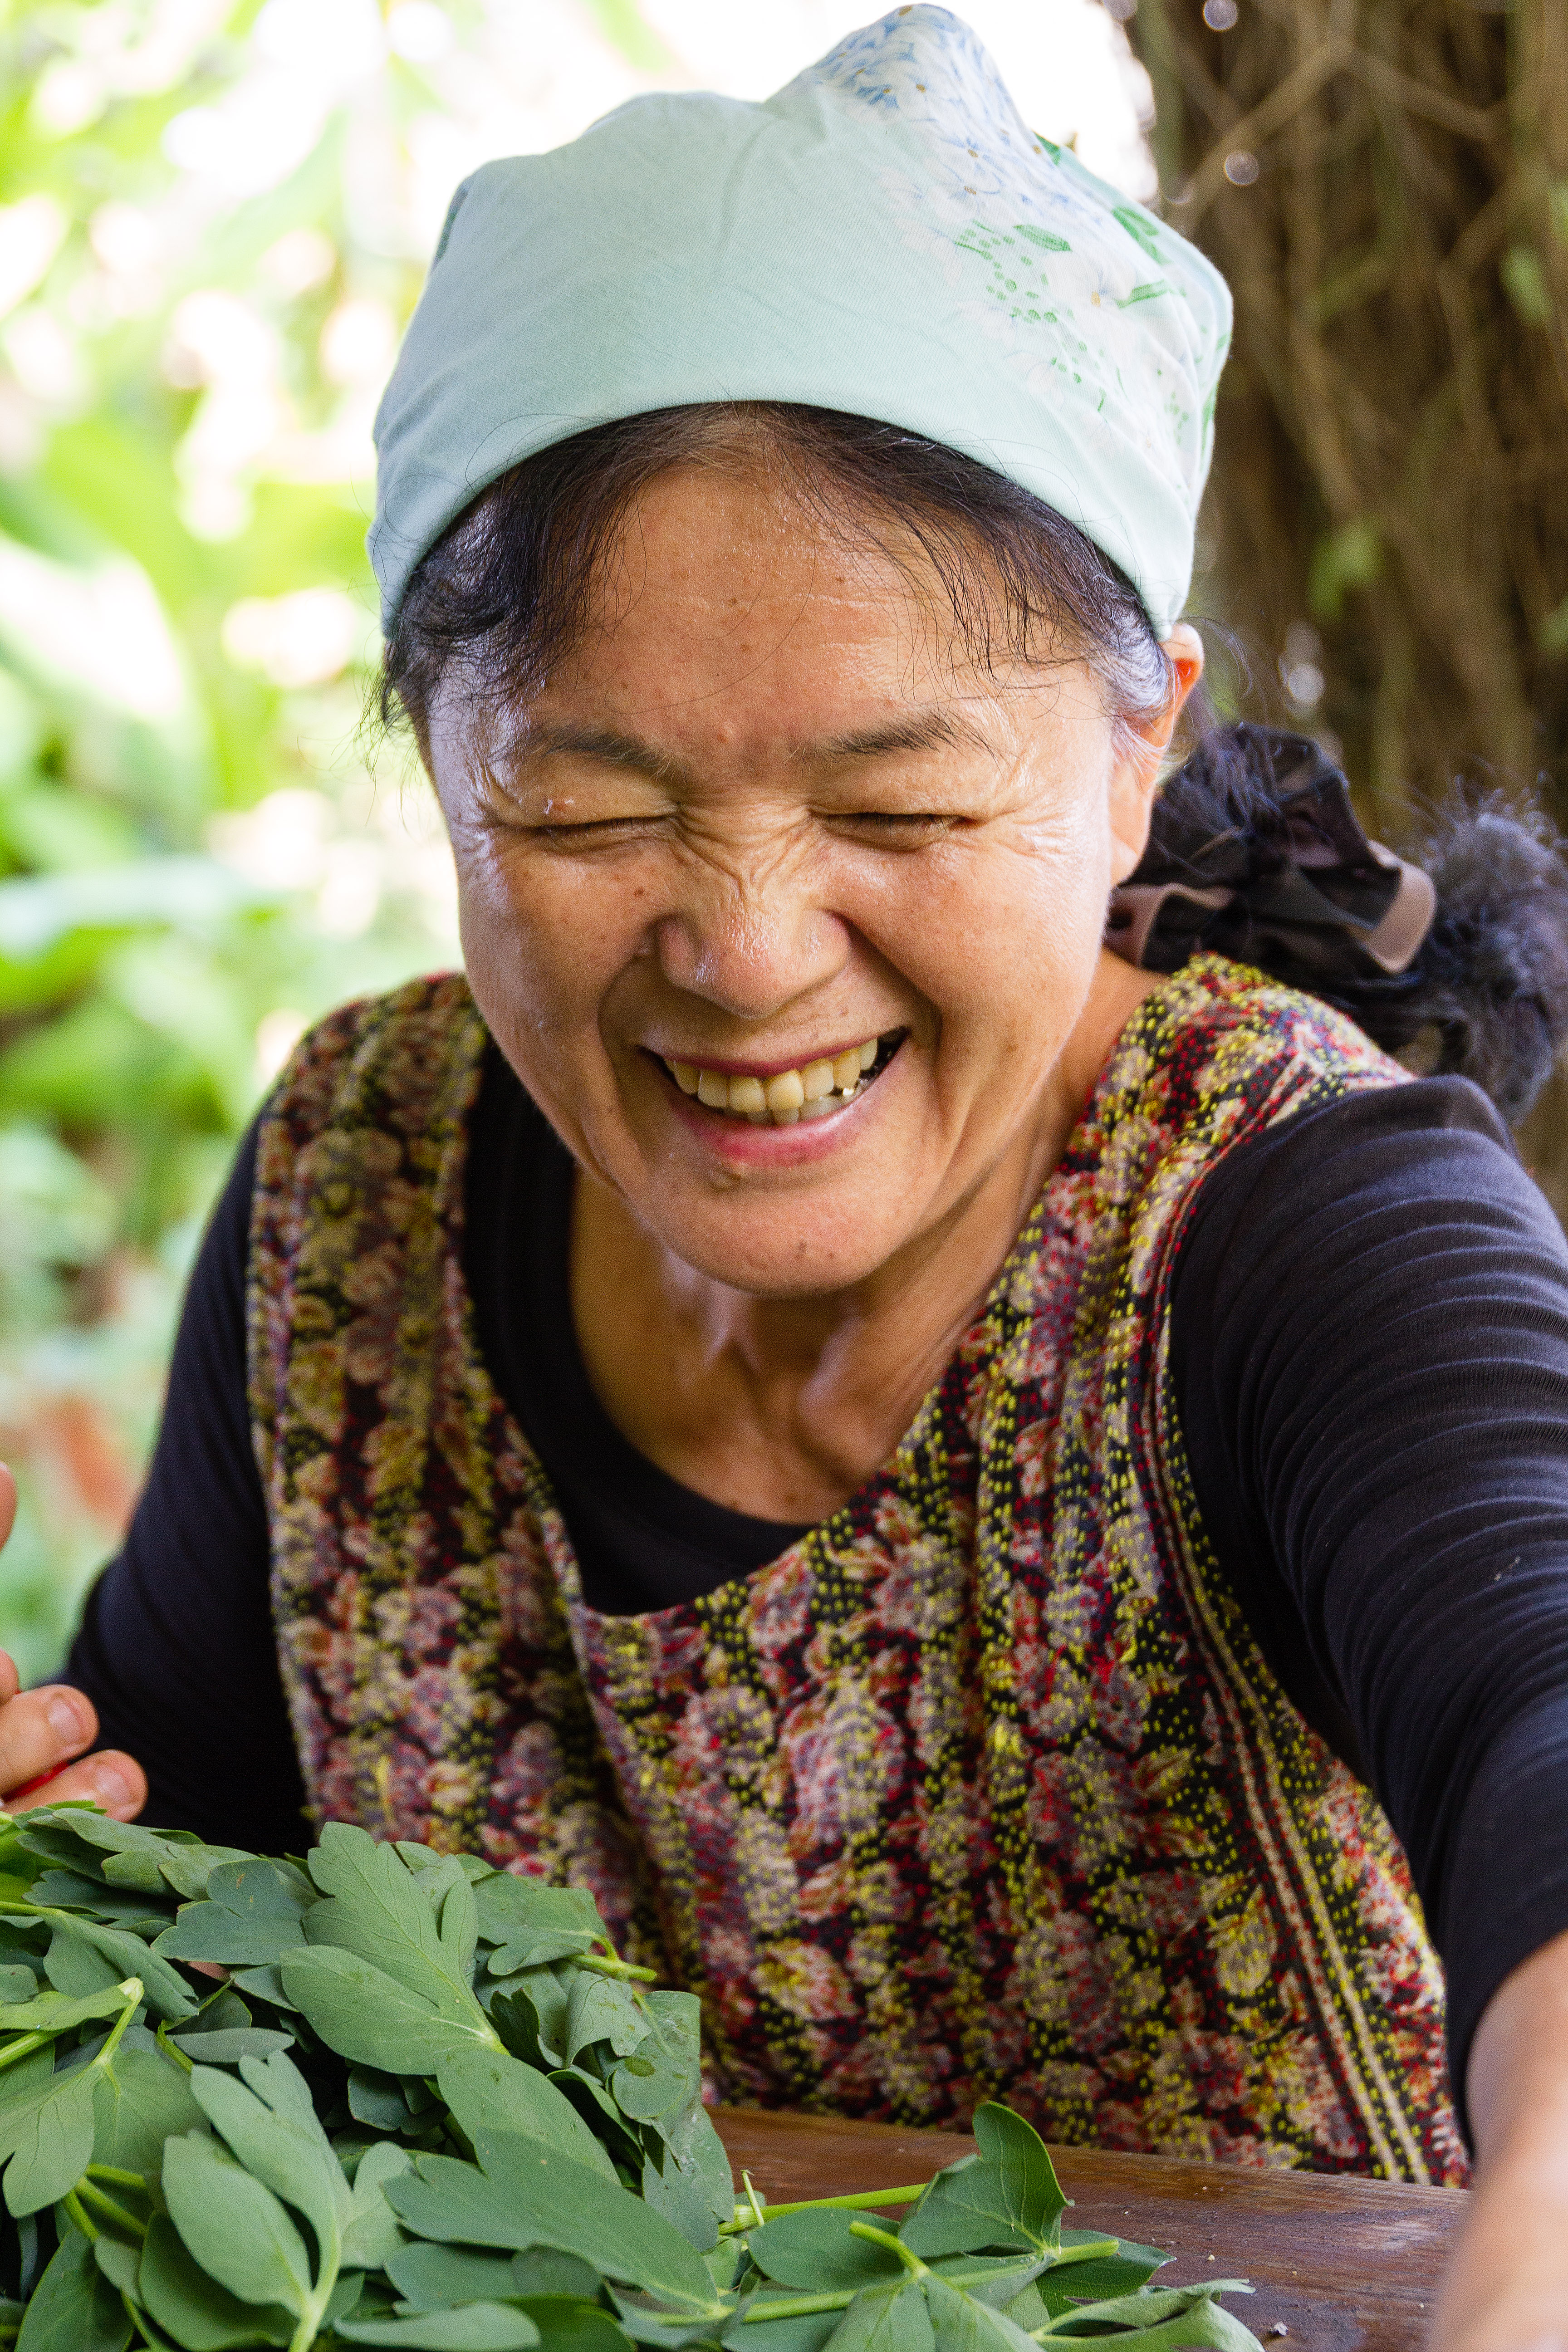 The People of Okinawa: Life in Portraits